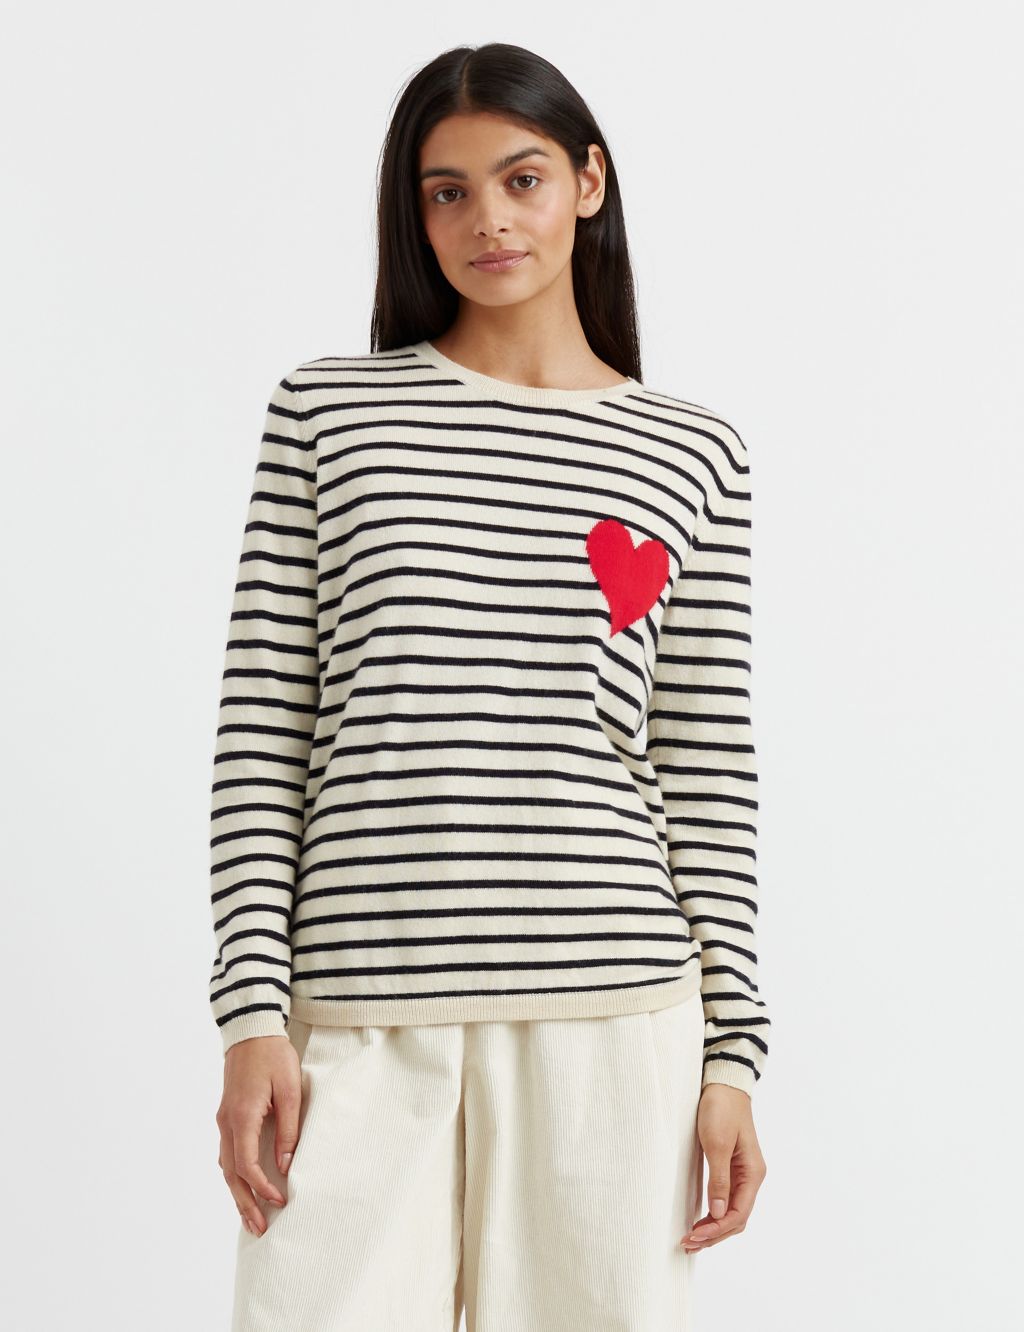 Wool Rich Striped Knitted Top with Cashmere image 1